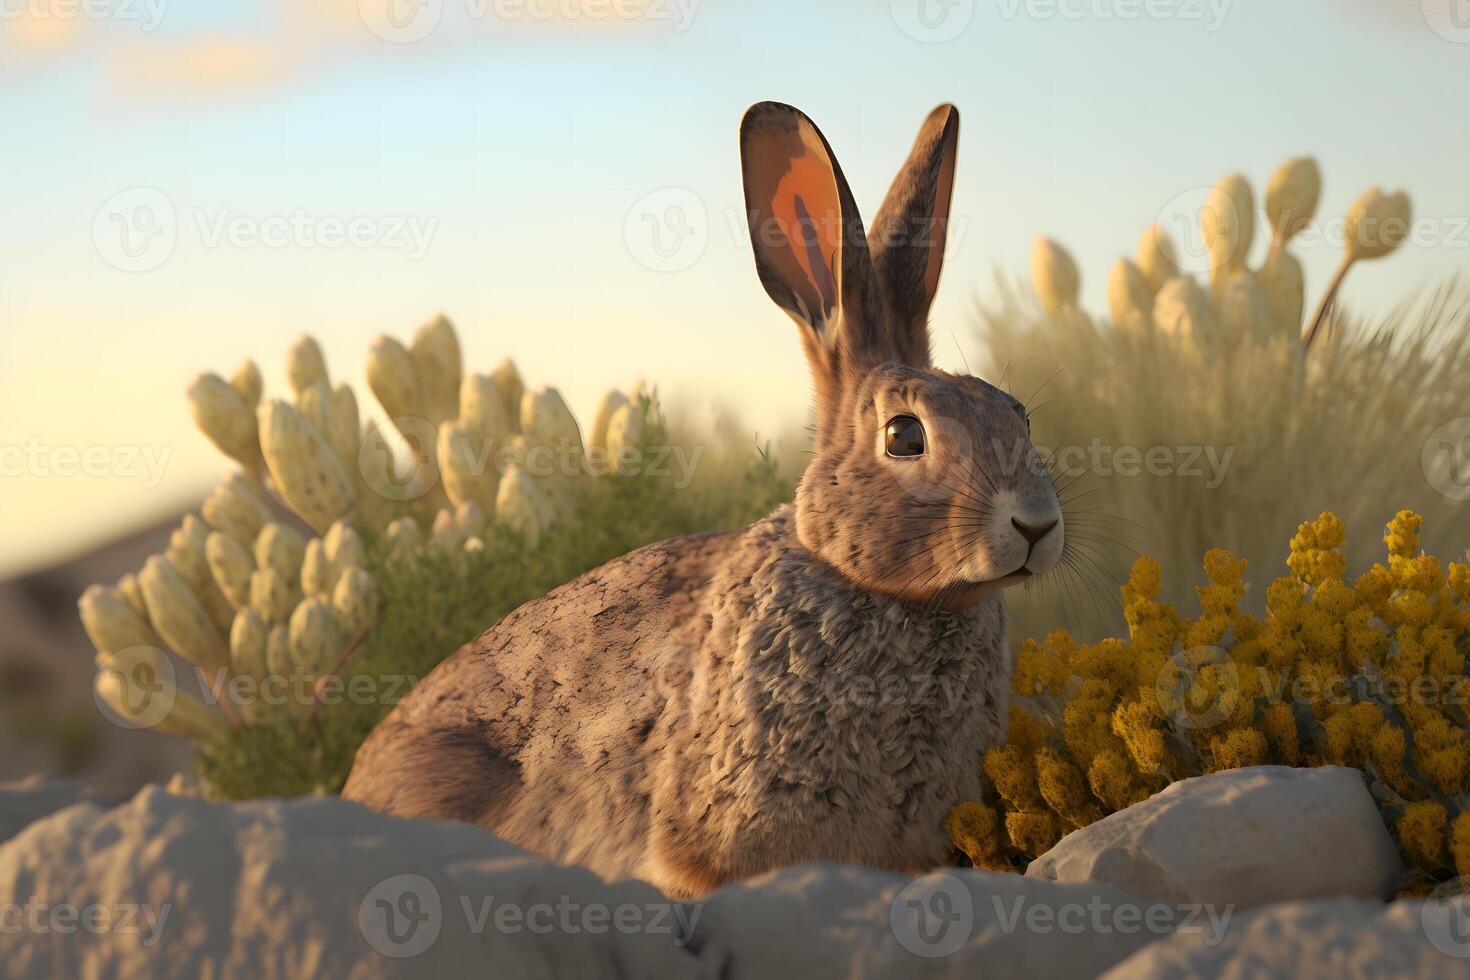 Cute brown hare, lepus europaeus, jumping closer on grass in spring nature. Young brown rabbit coming forward in green wilderness. Neural network photo